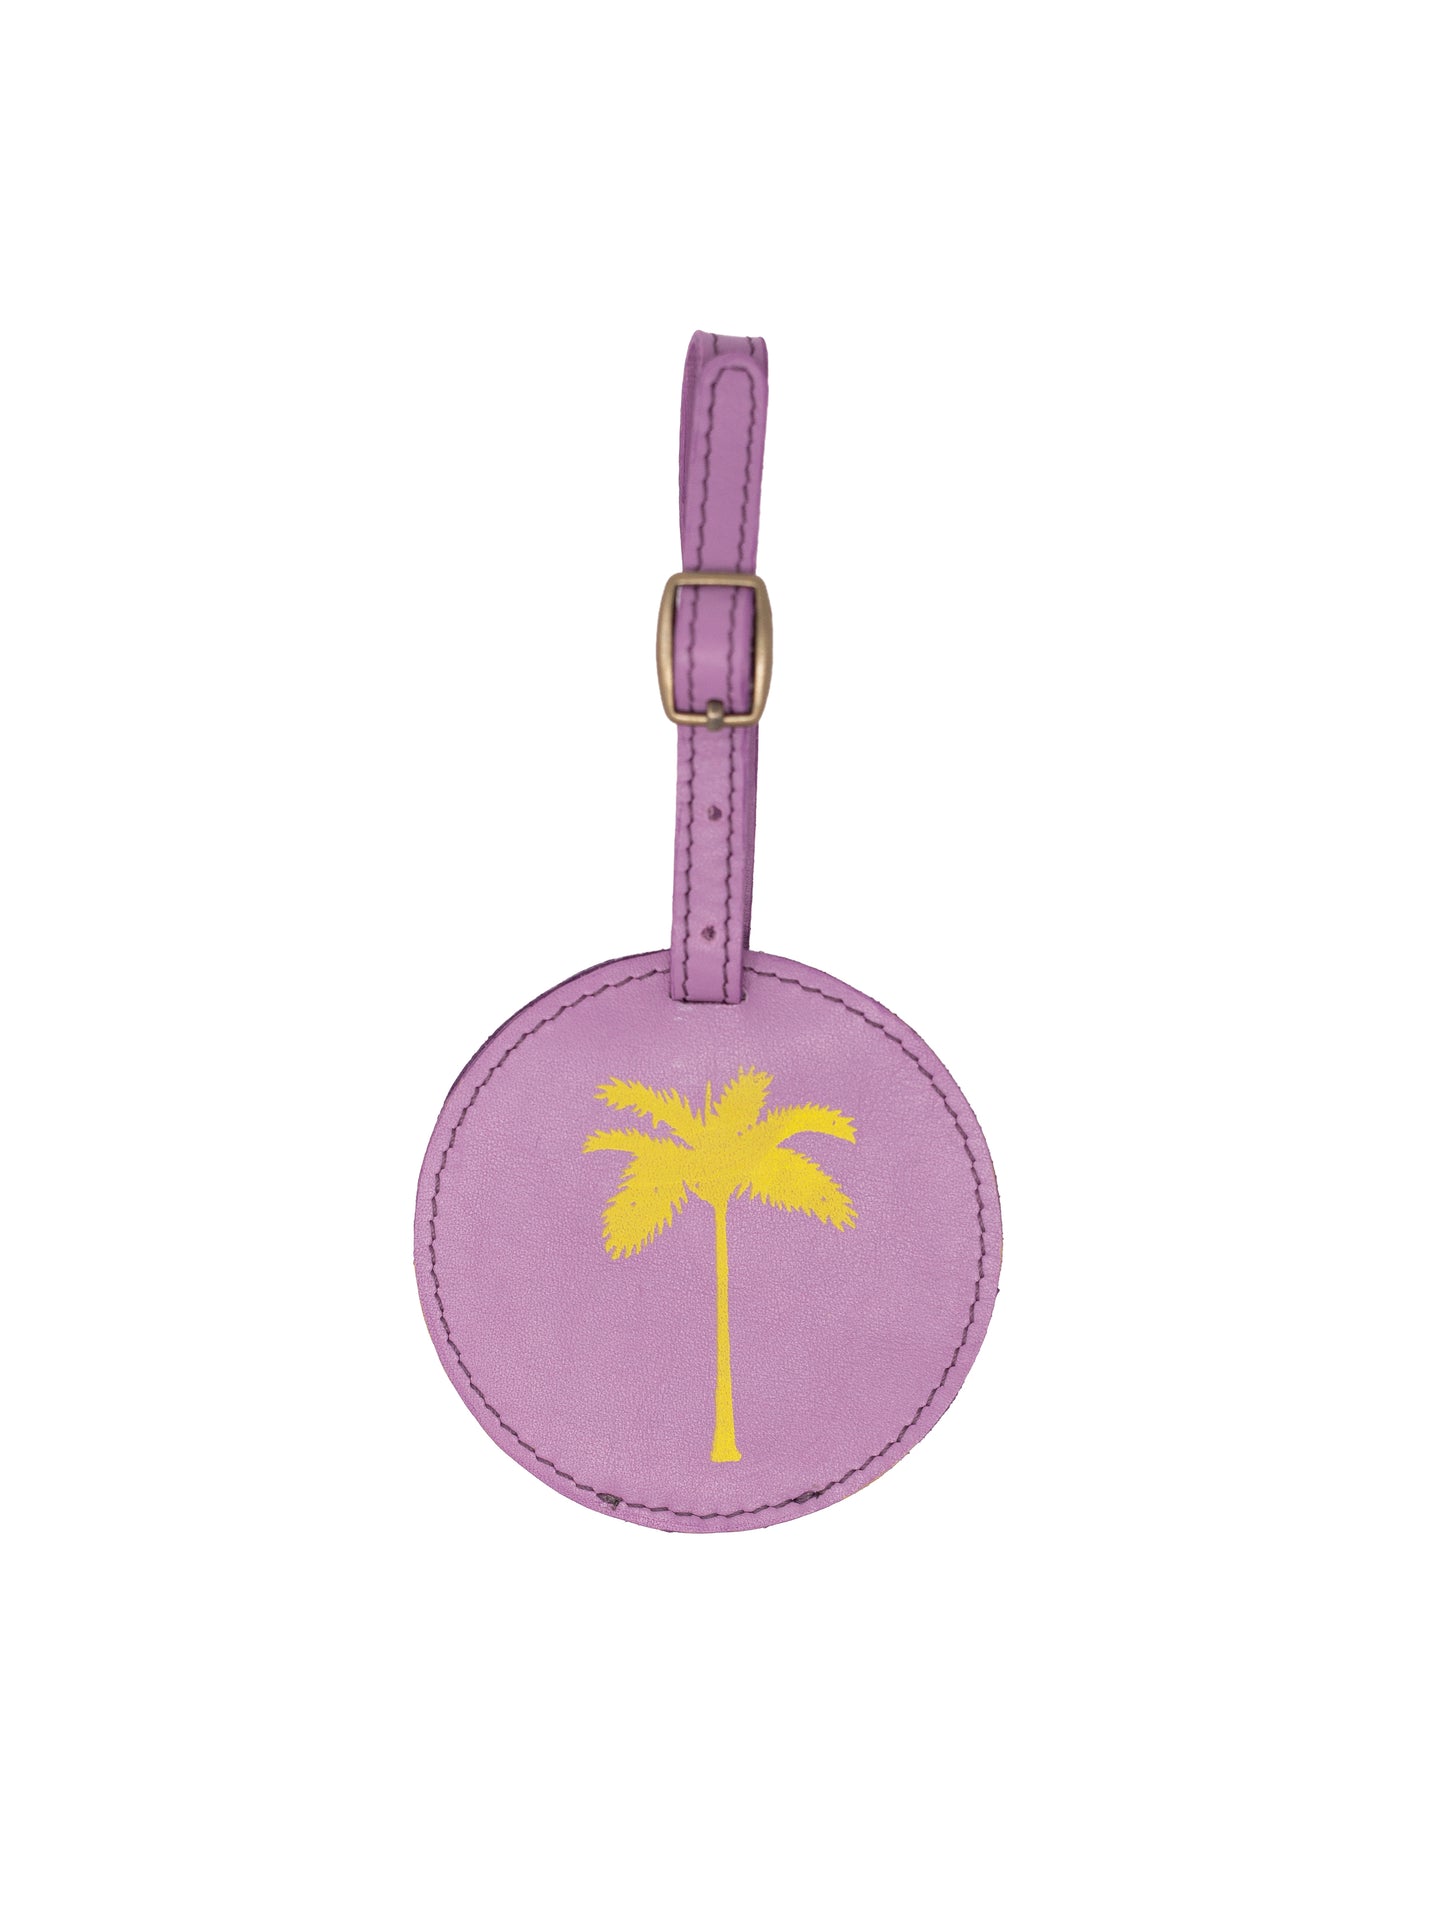 Palm Tree Luggage Tags- Lavender Leather luggage tags by payton james